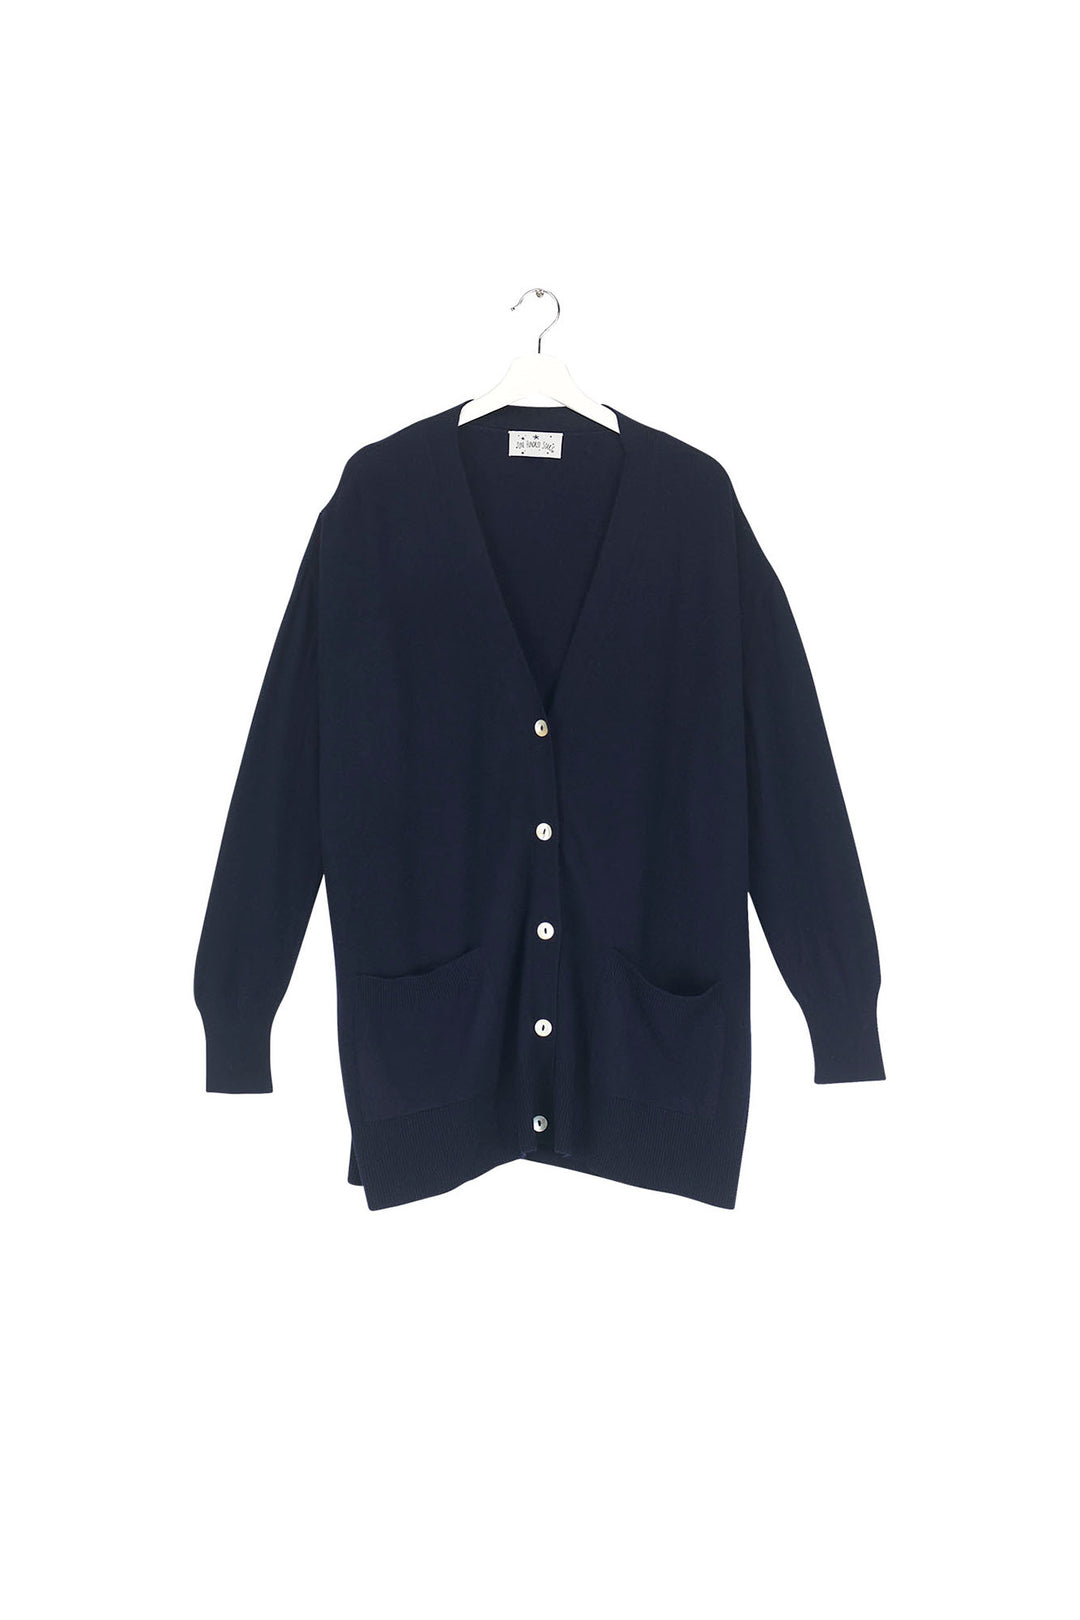 Navy Cashmere Slouch Cardigan - One Hundred Stars